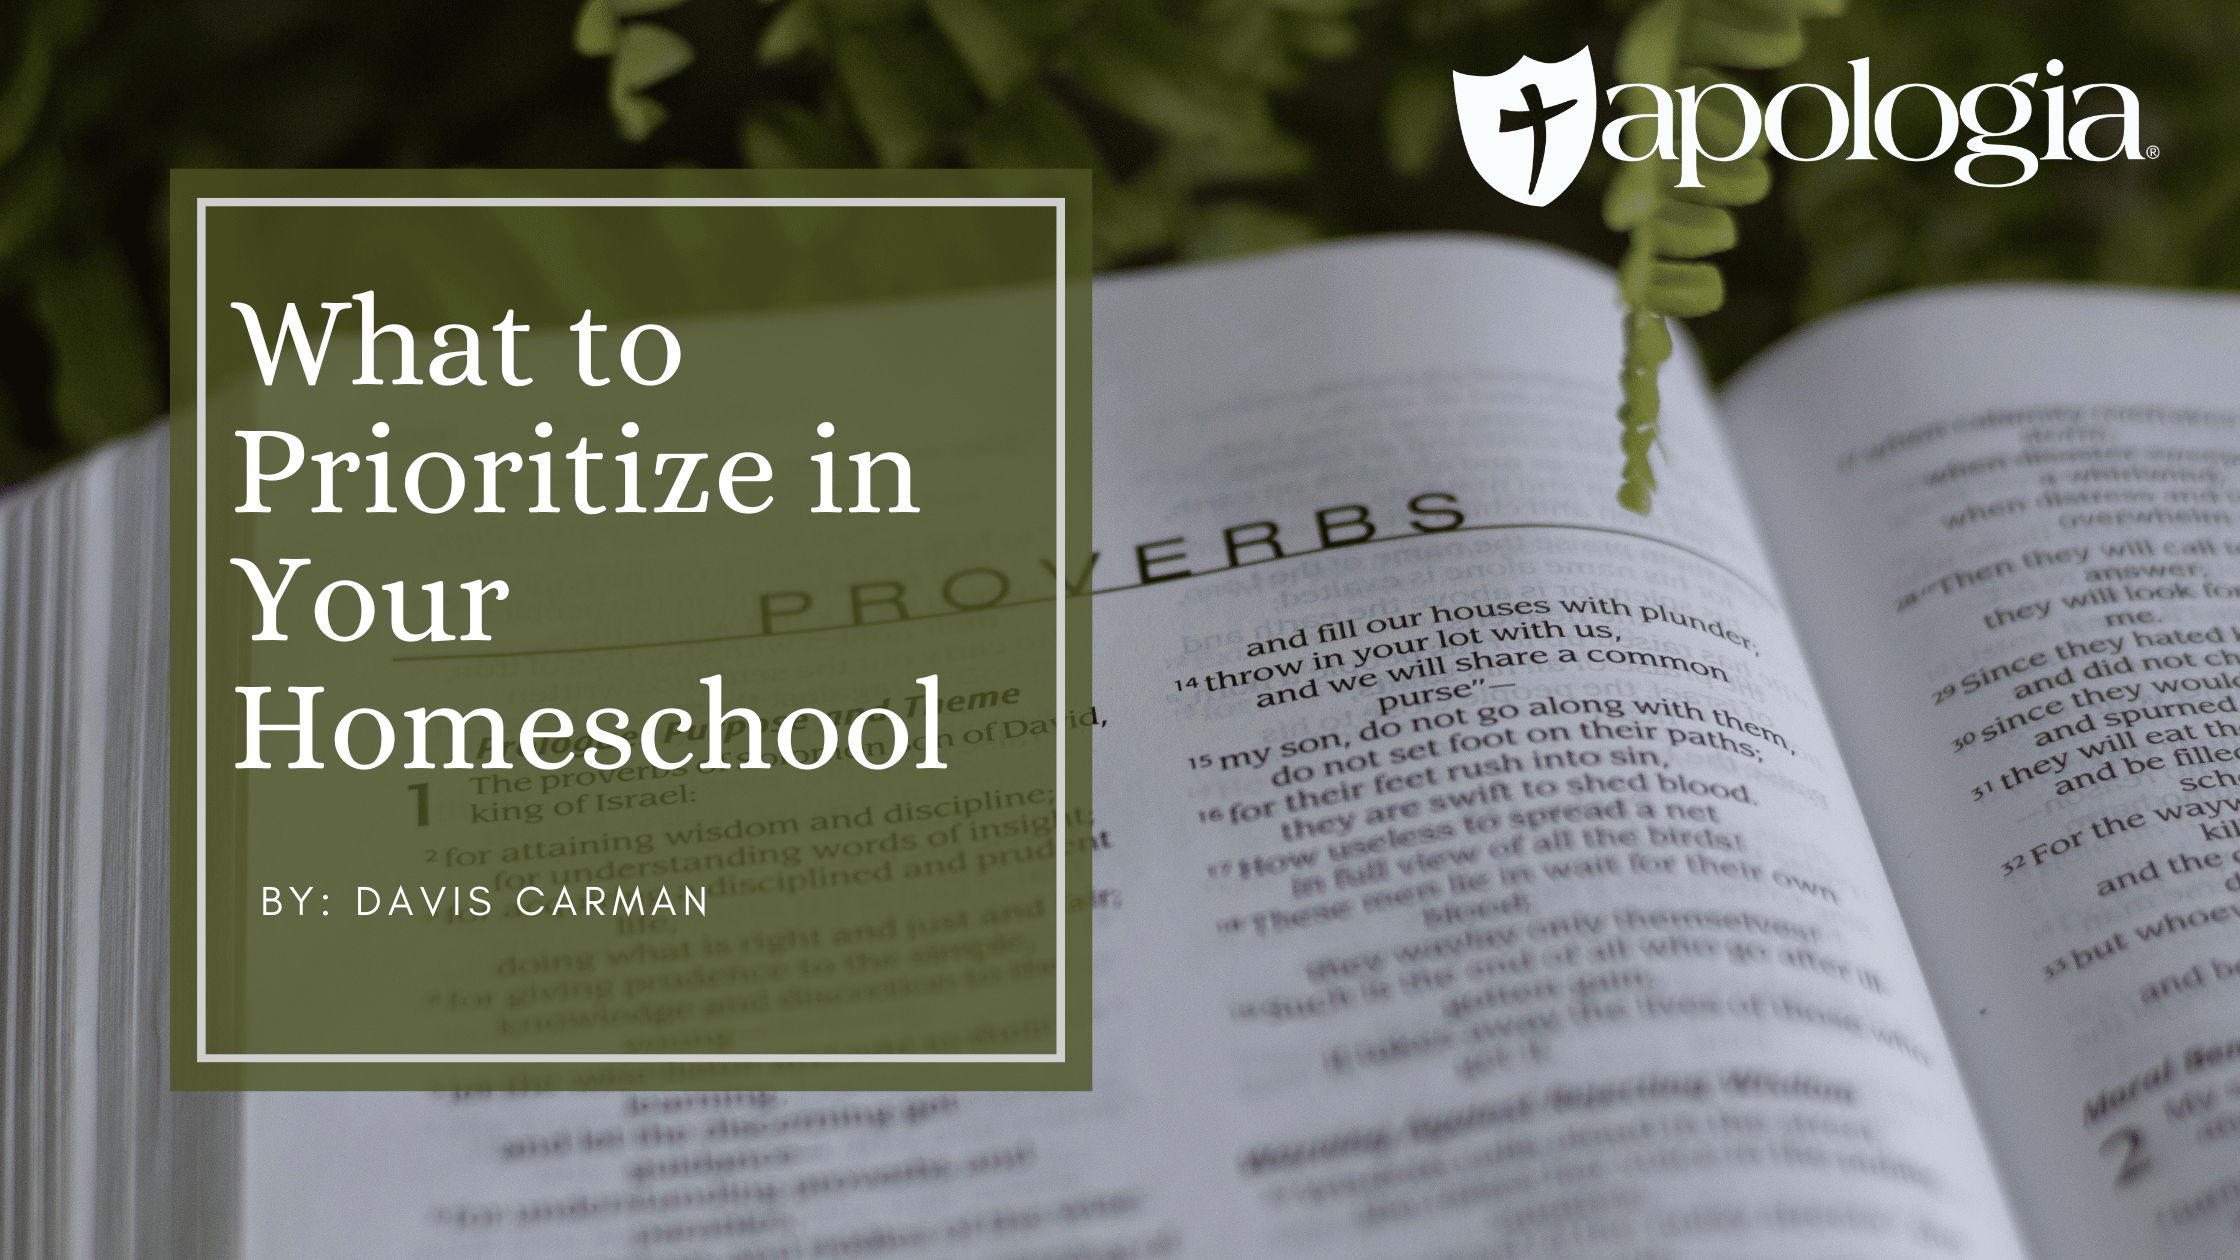 What to Prioritize in Your Homeschool